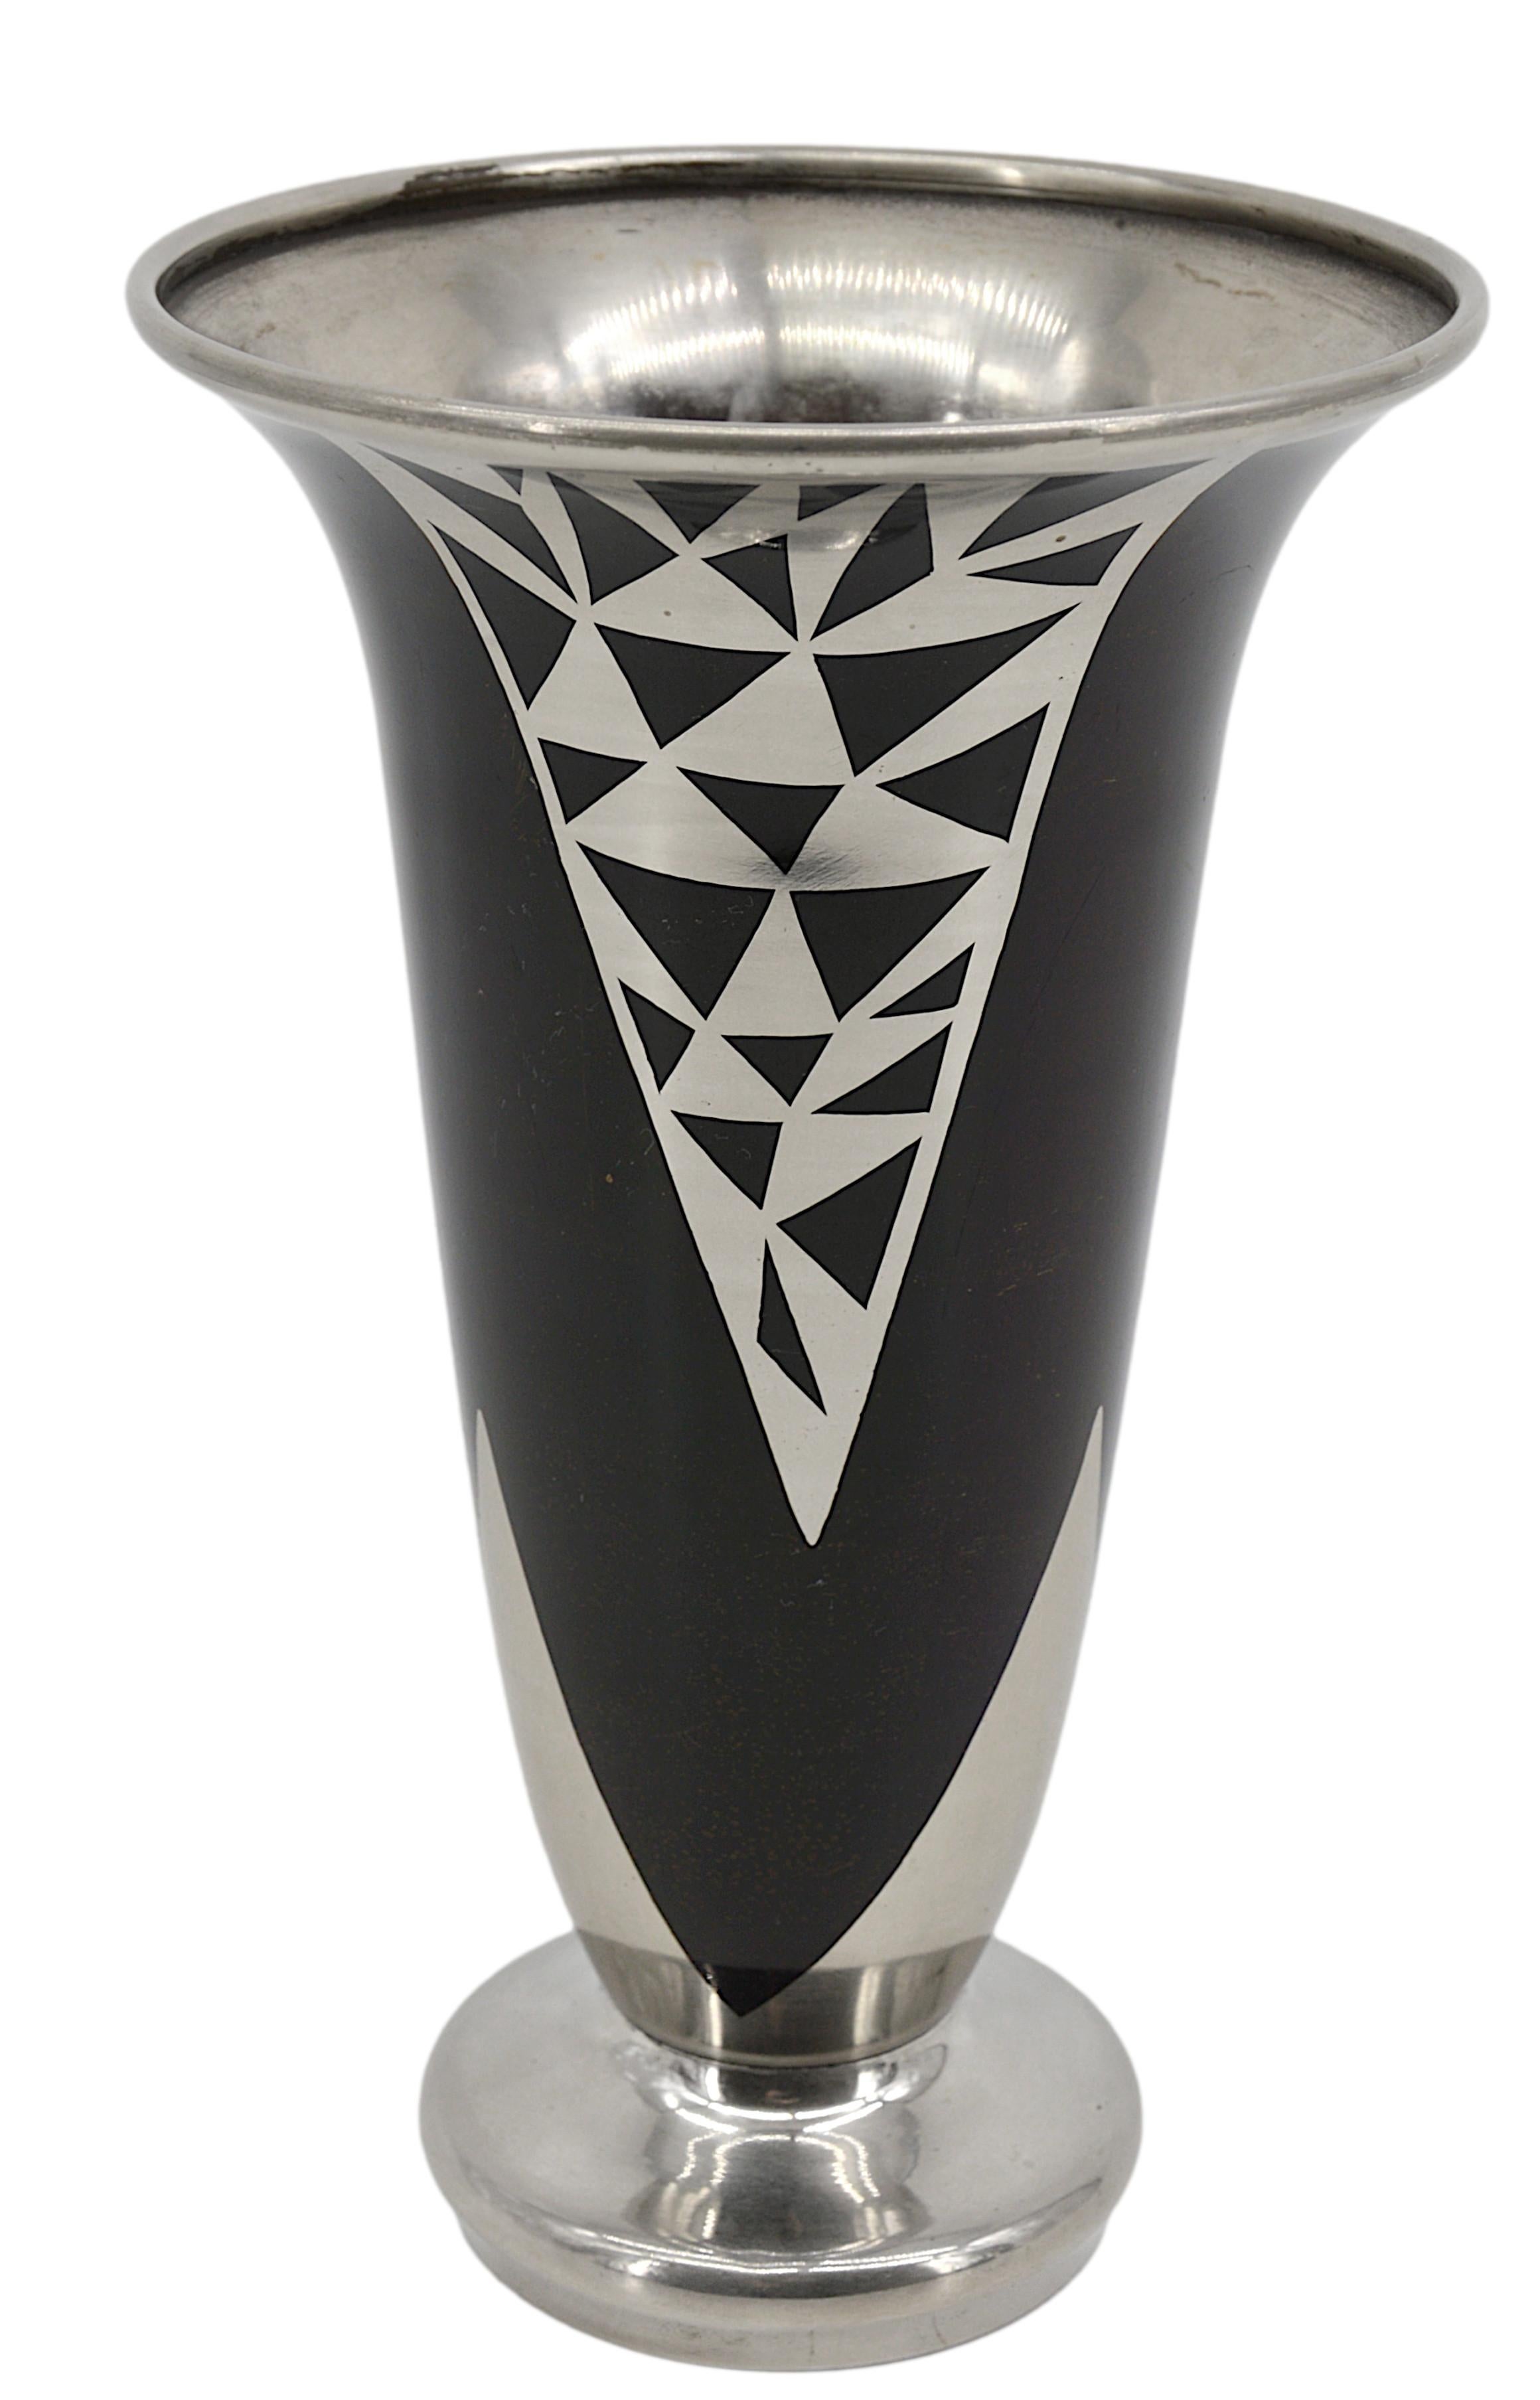 Art Deco brassware vase by Jacques Douau, France, 1937. Geometric silver-plated pattern inside a dark brown patina. Measures: height: 10.2 